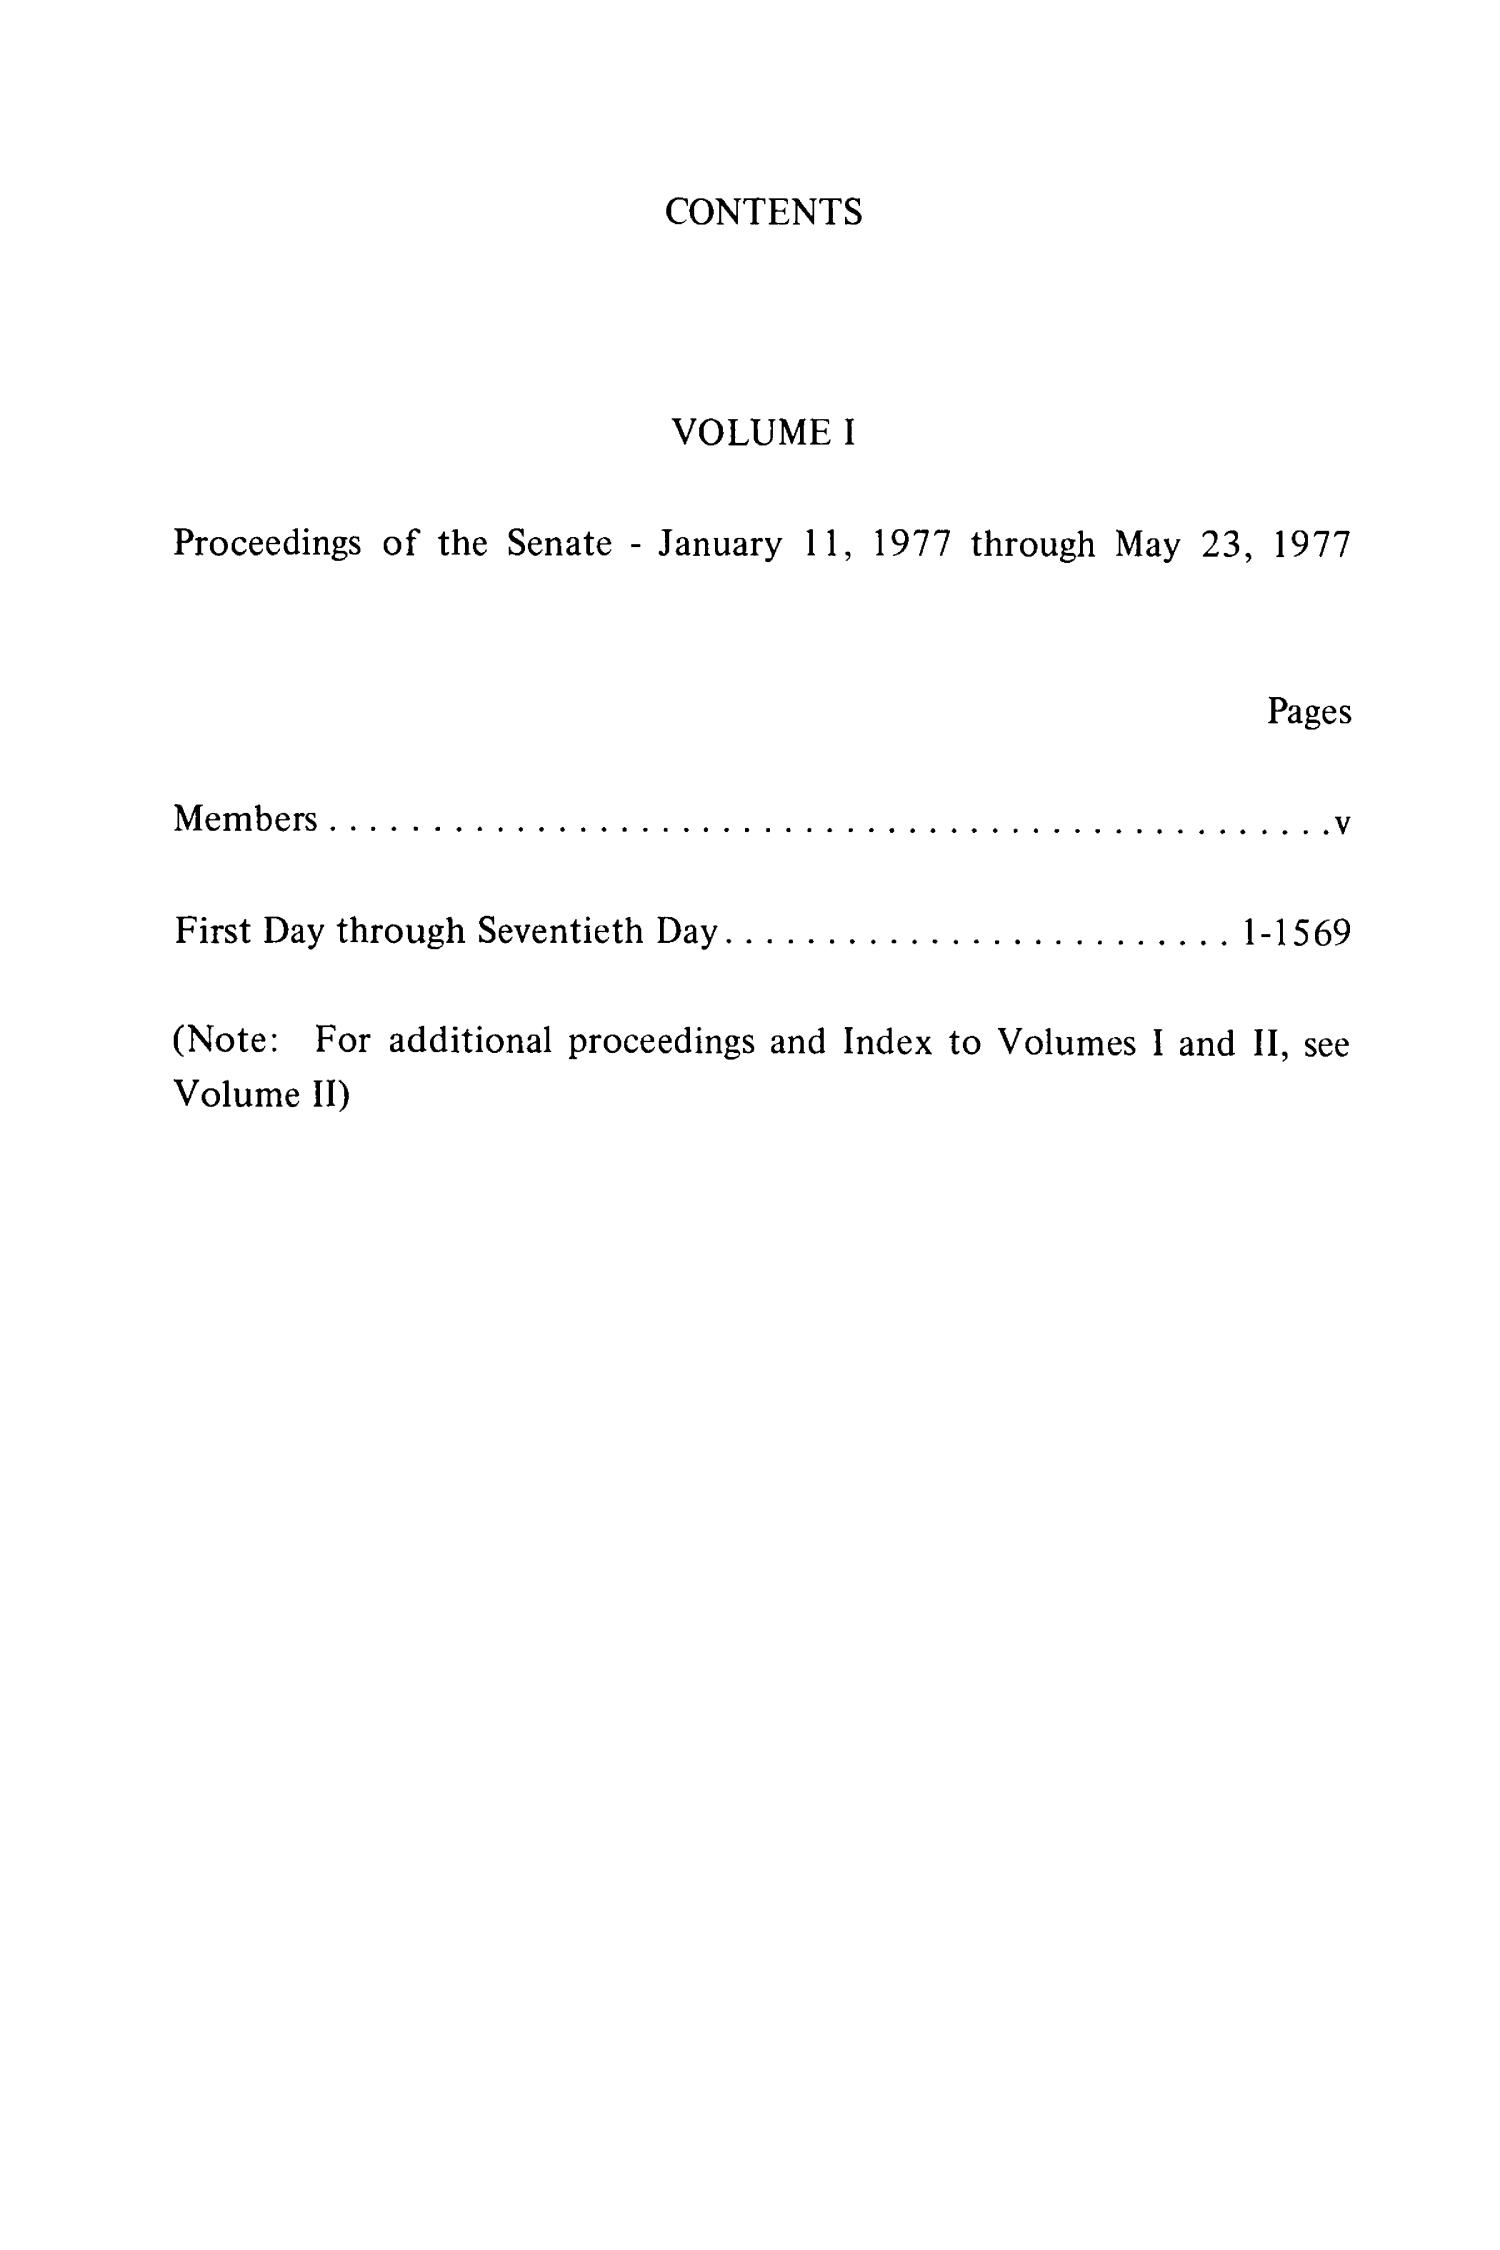 Journal of the Senate of the State of Texas, Regular Session of the Sixty-Fifth Legislature, Volume 1
                                                
                                                    None
                                                